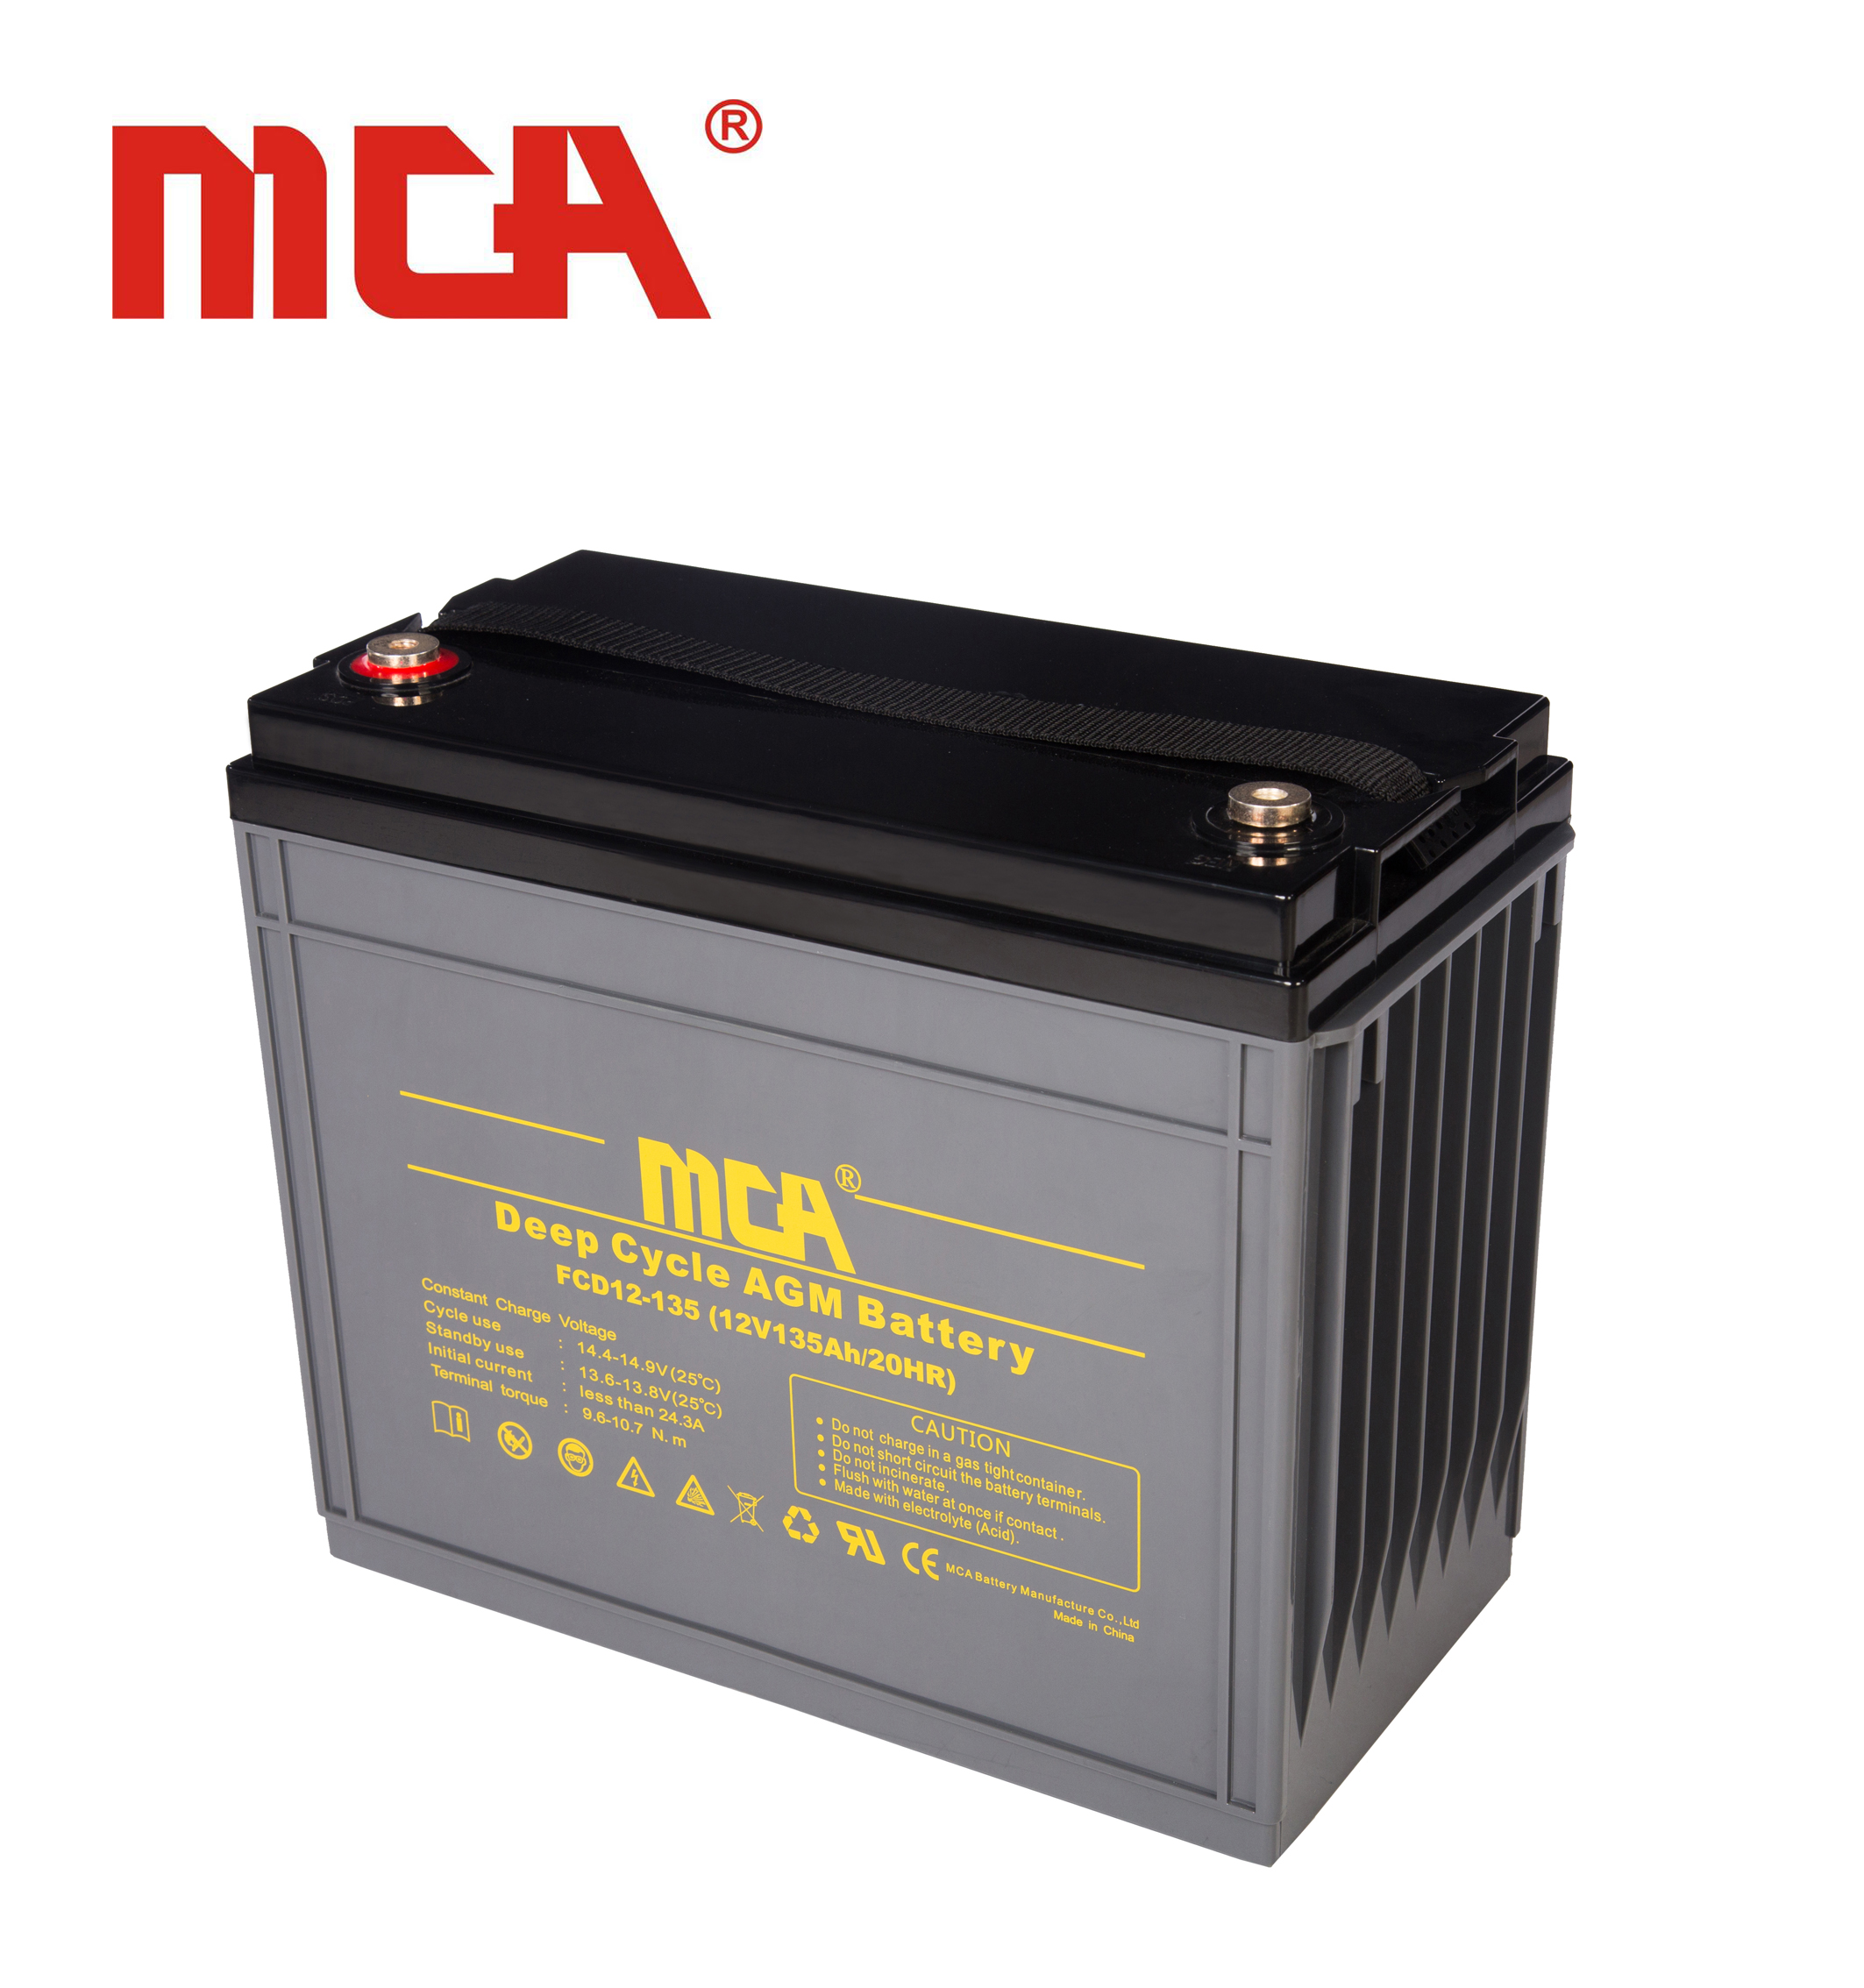 Deep Cycle 12V Storage Gel Battery for Home